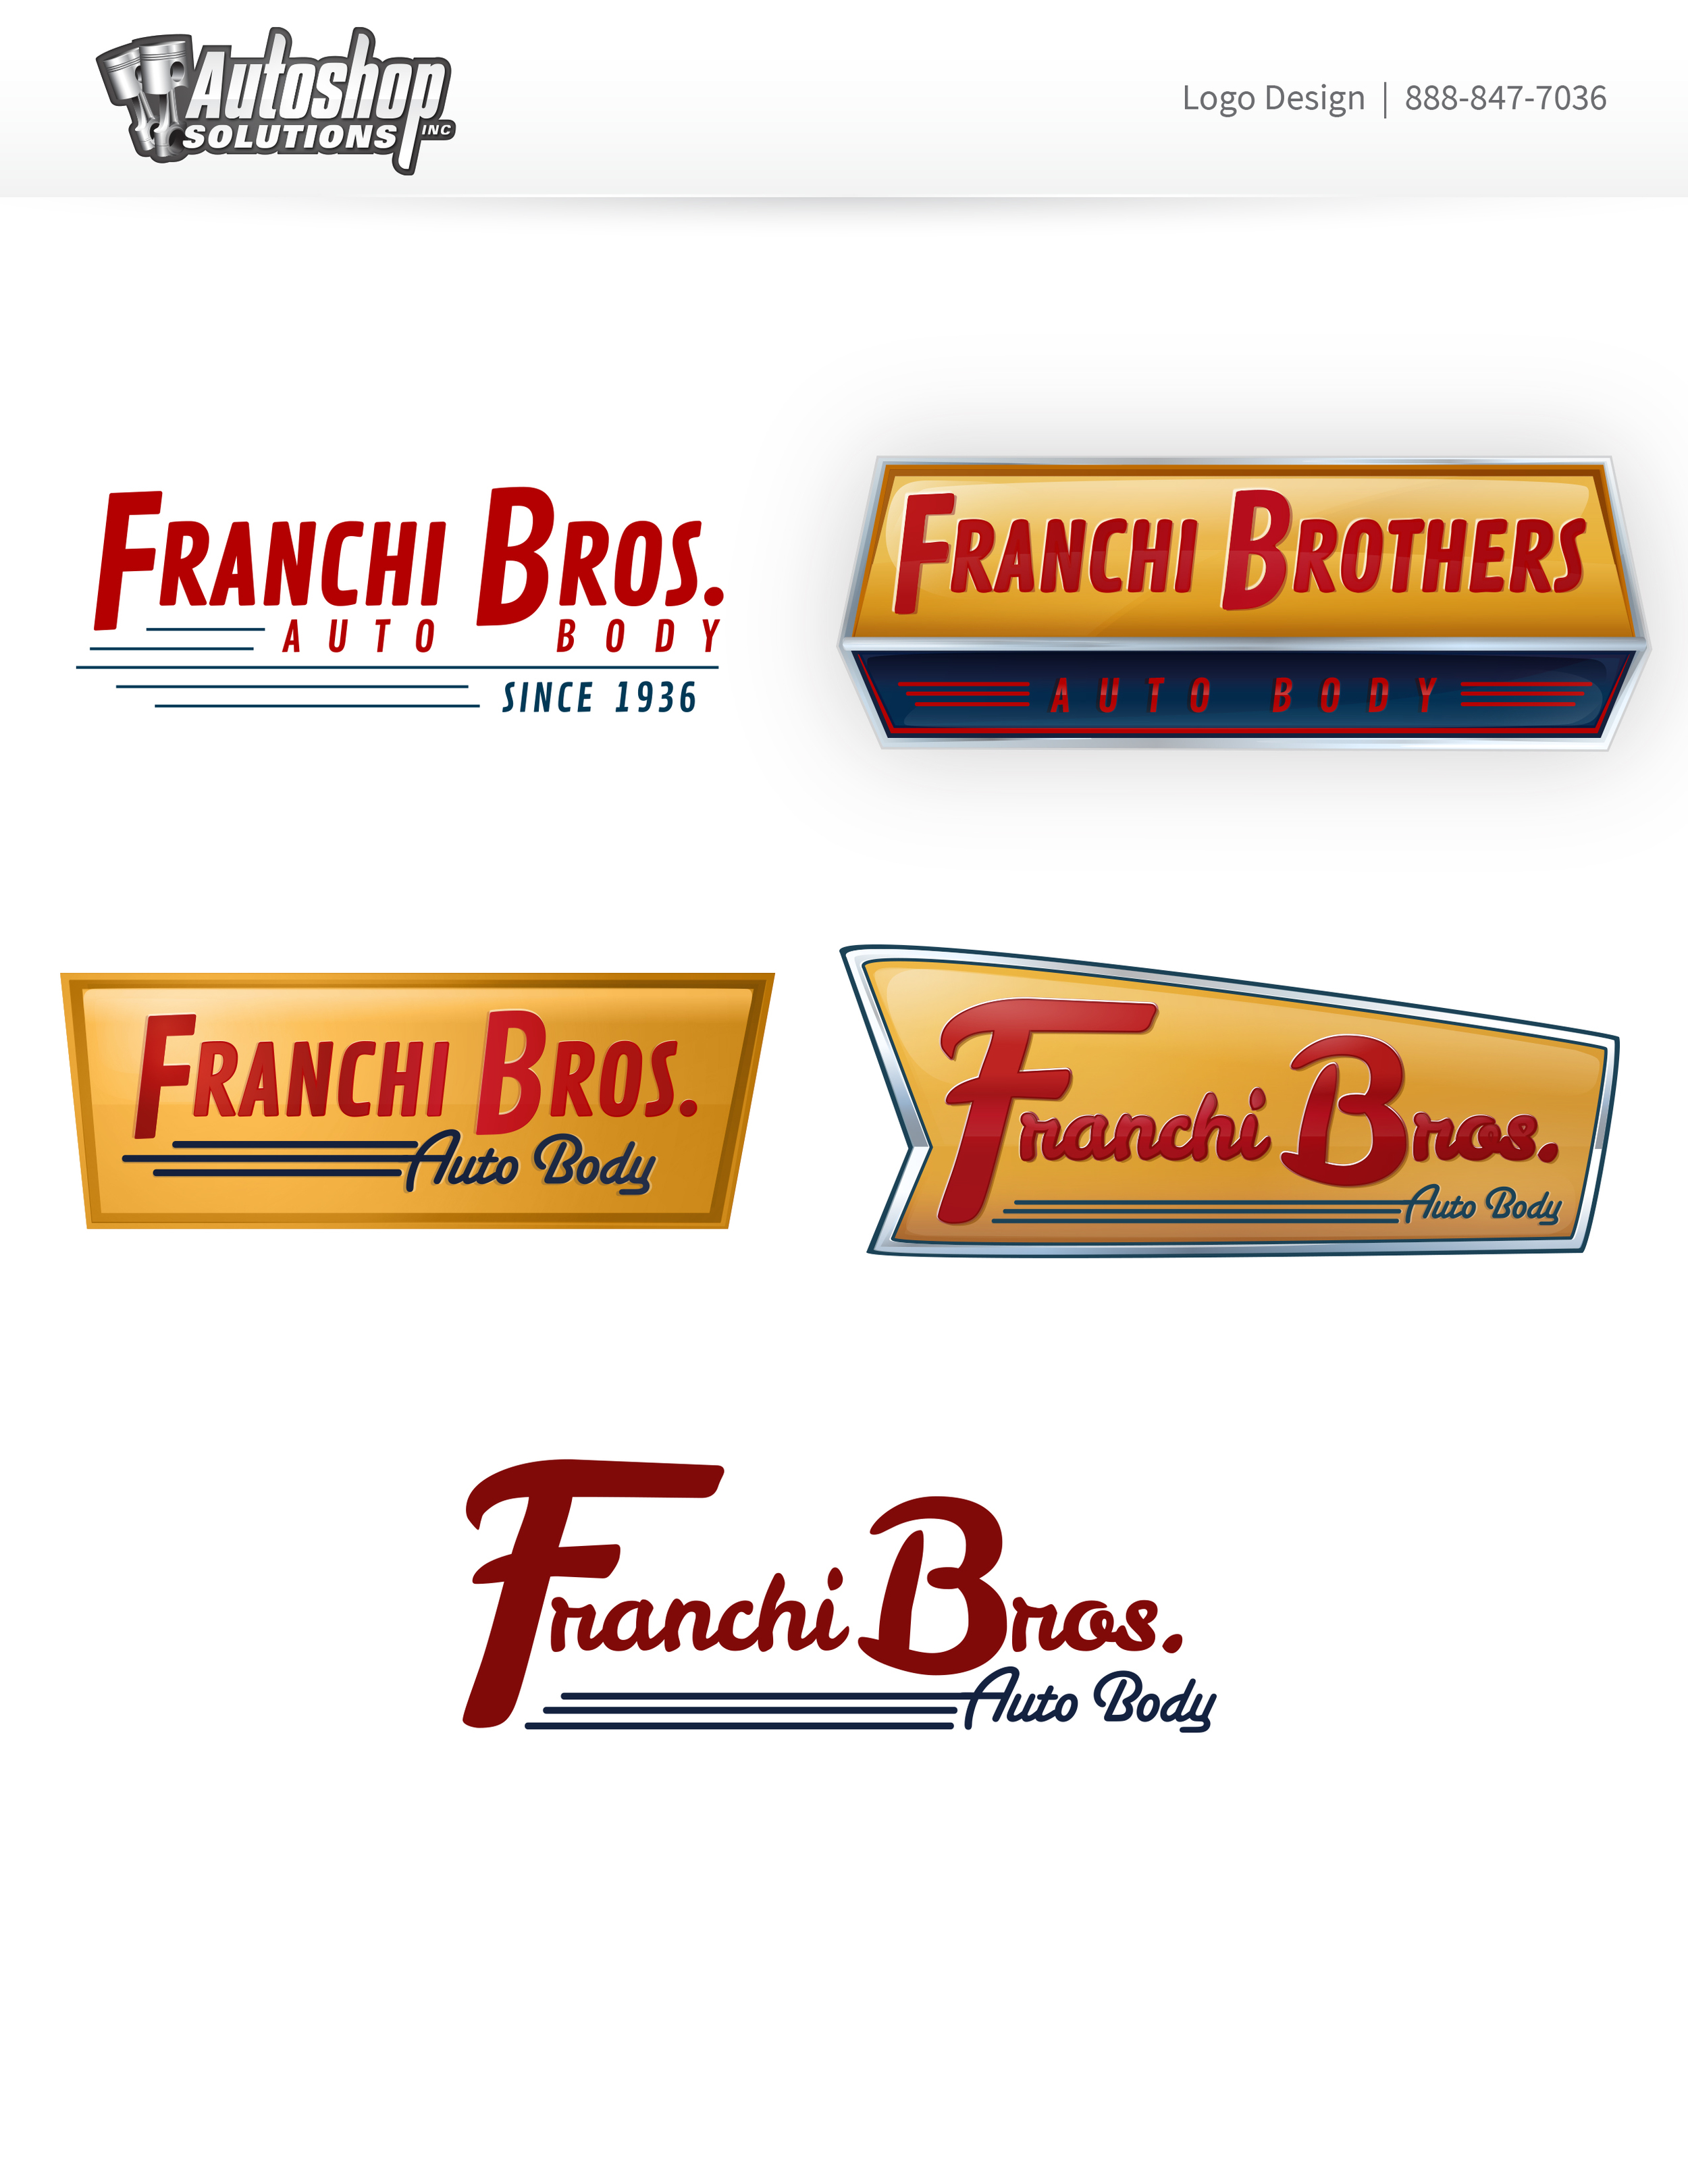 Franchi Brothers Auto Body - Phase 1